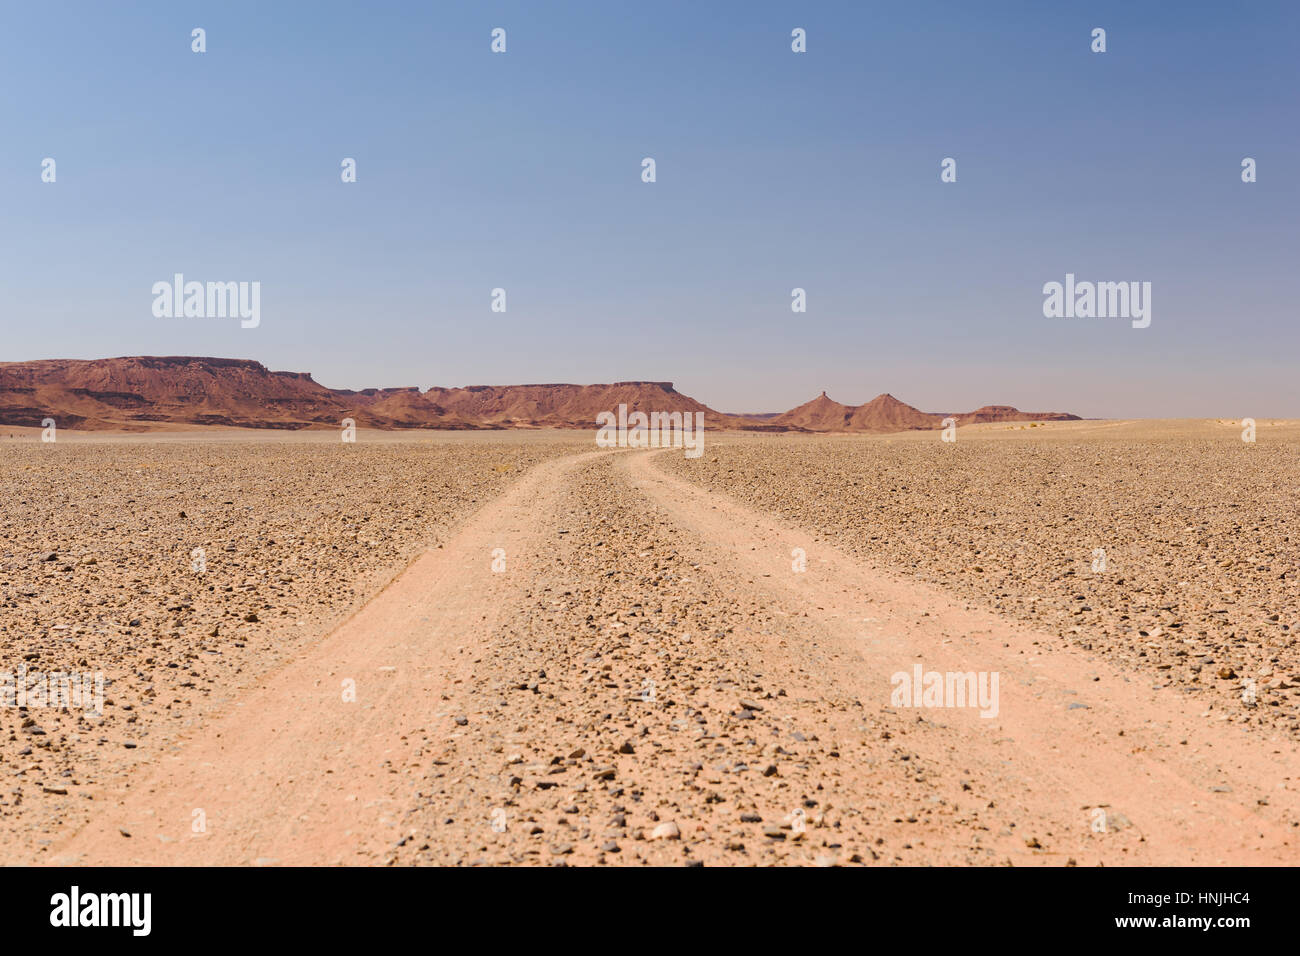 Dusty off-road track leading to the horizon, Morocco Stock Photo